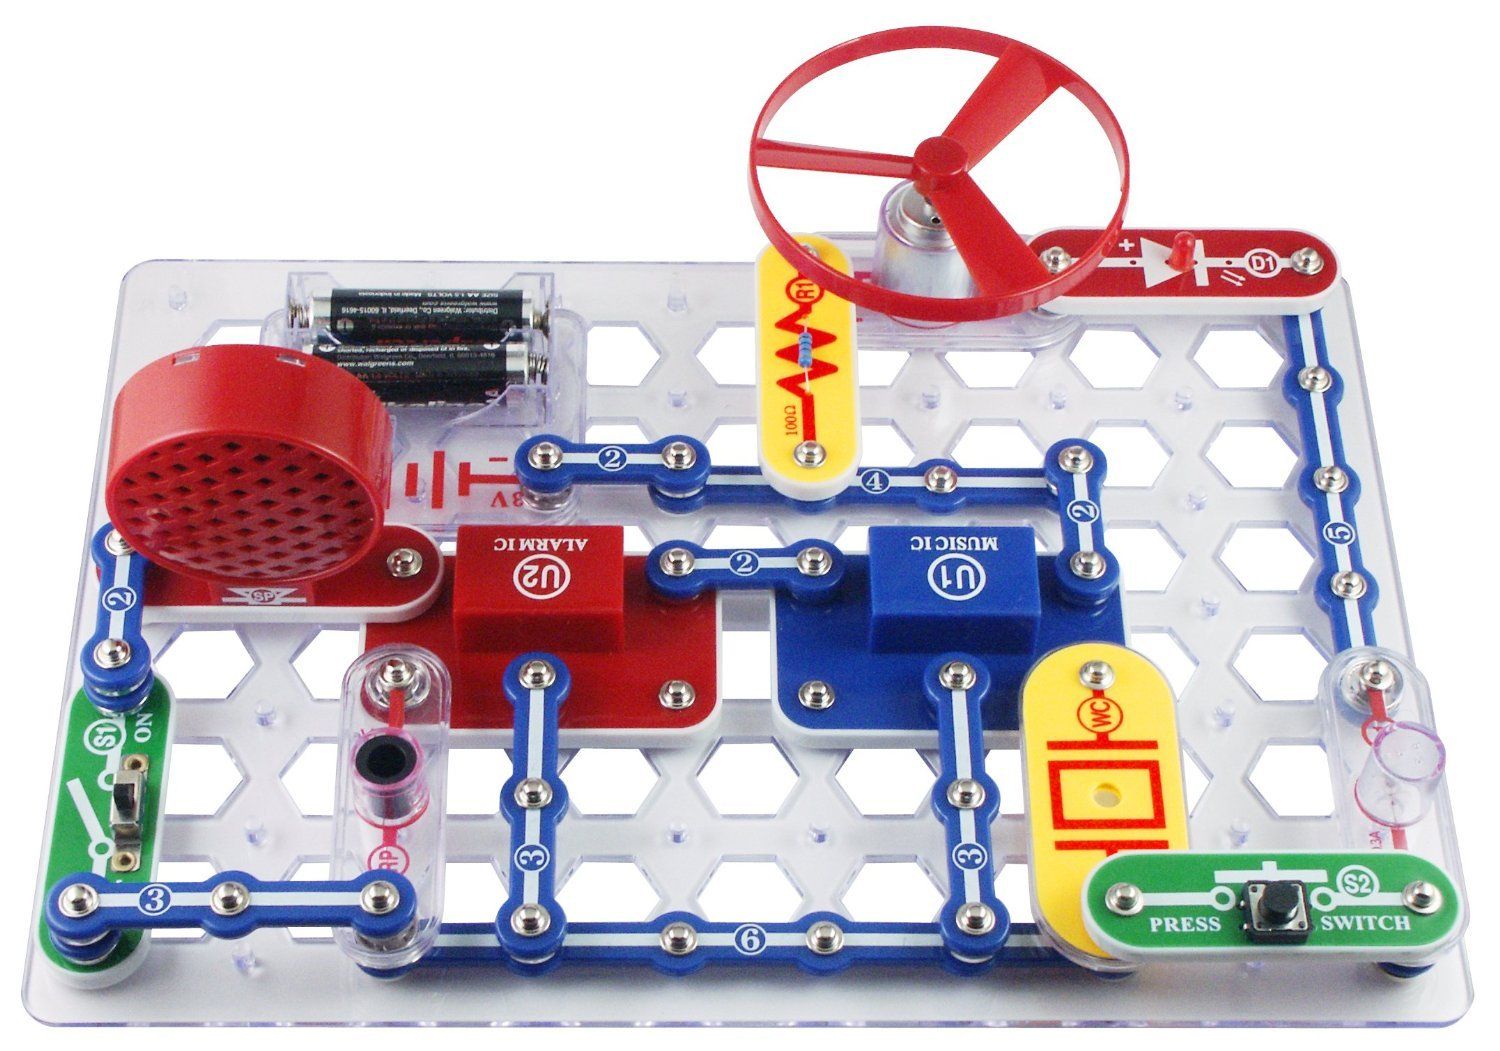 Best educational toys for tweens and teens: Snap Circuits circuitry kits. So fun!